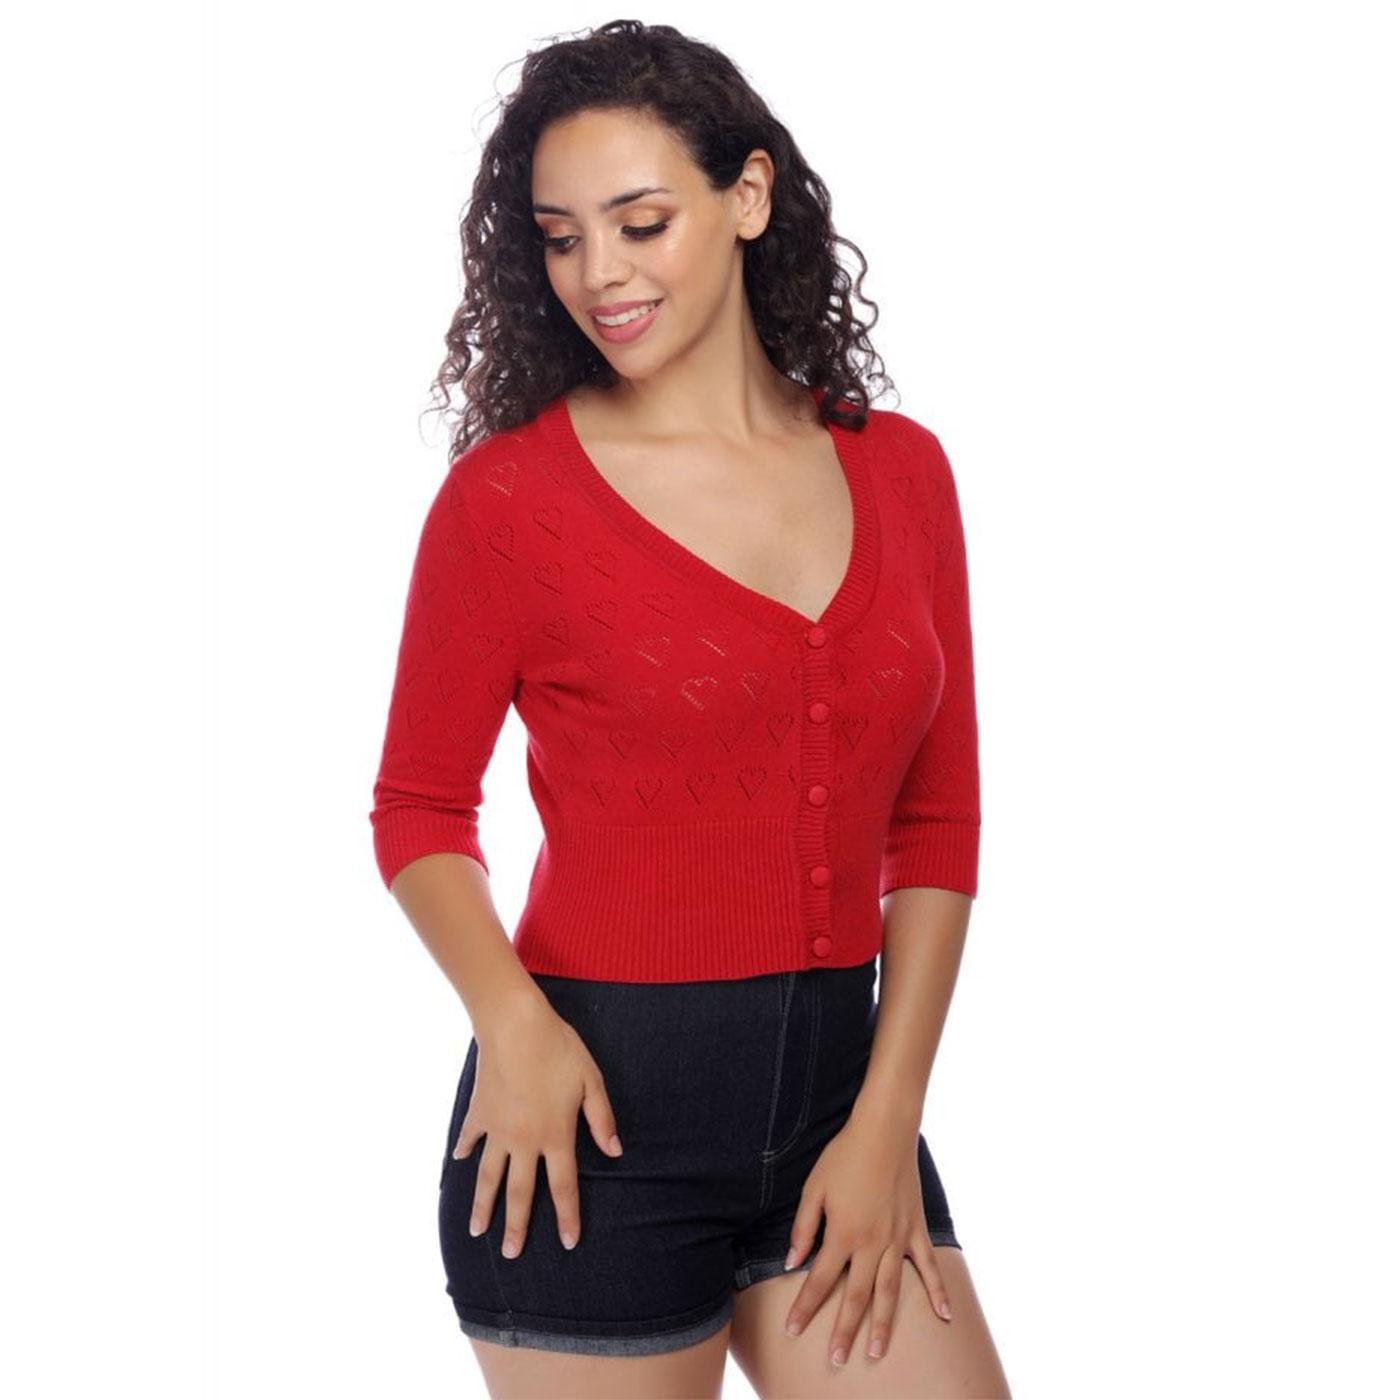 Evie COLLECTIF Retro 50s Heart Knit Cardigan - Red